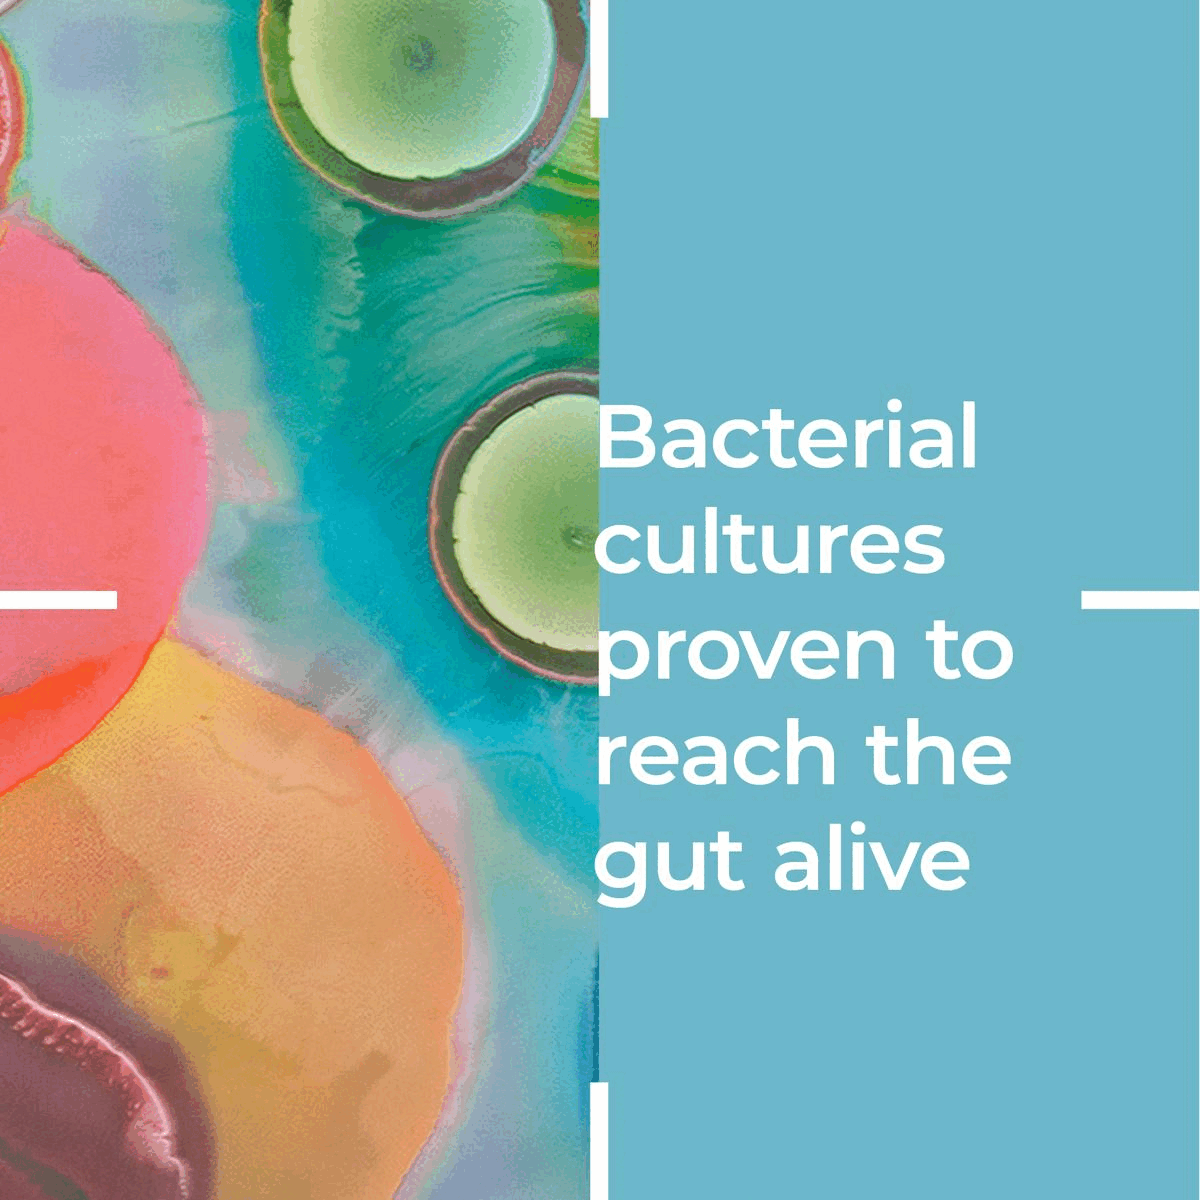  Bacterial cultures proven to reach the gut alive, supports your gut contains calcium which contributes to the normal function of digestive enzymes. Contains vitamins B6 and B12 which both contribute to the reduction of tiredness and fatigue, helps reduce fatigue